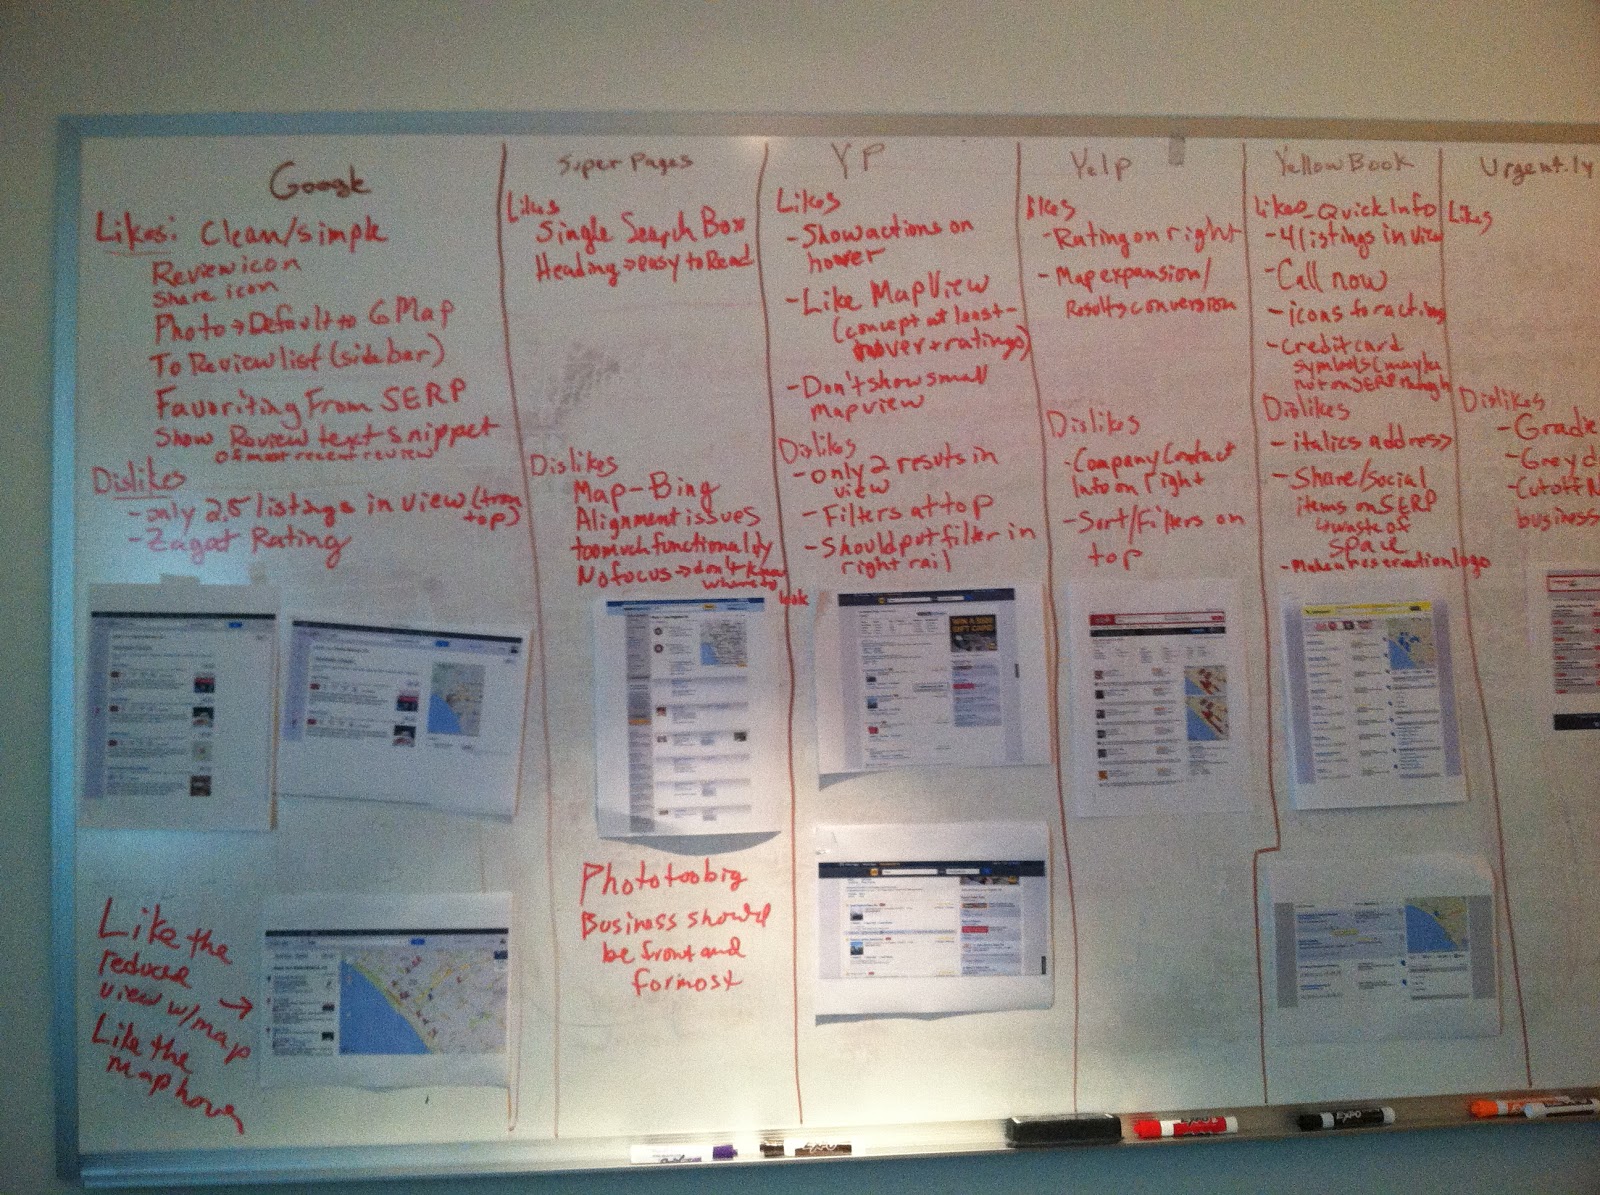  A competitive analysis for a digital business listing is documented on a whiteboard with qualitative comparison metrics.